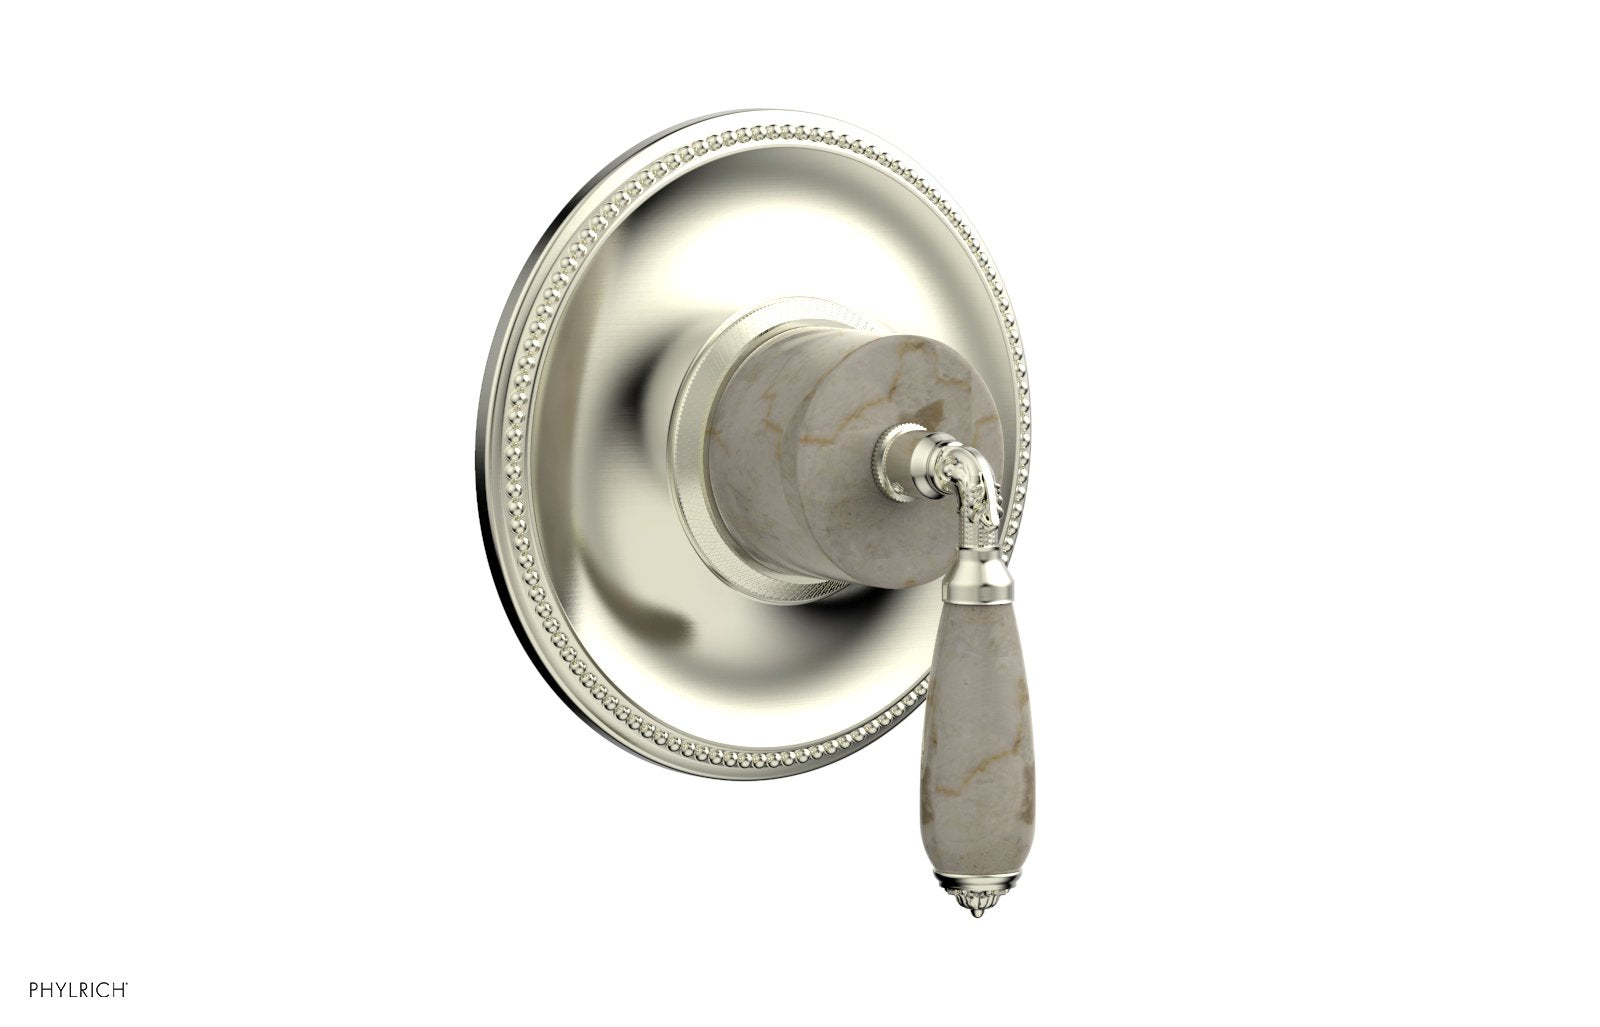 Phylrich VALENCIA Thermostatic Shower Trim, Beige Marble Lever Handle